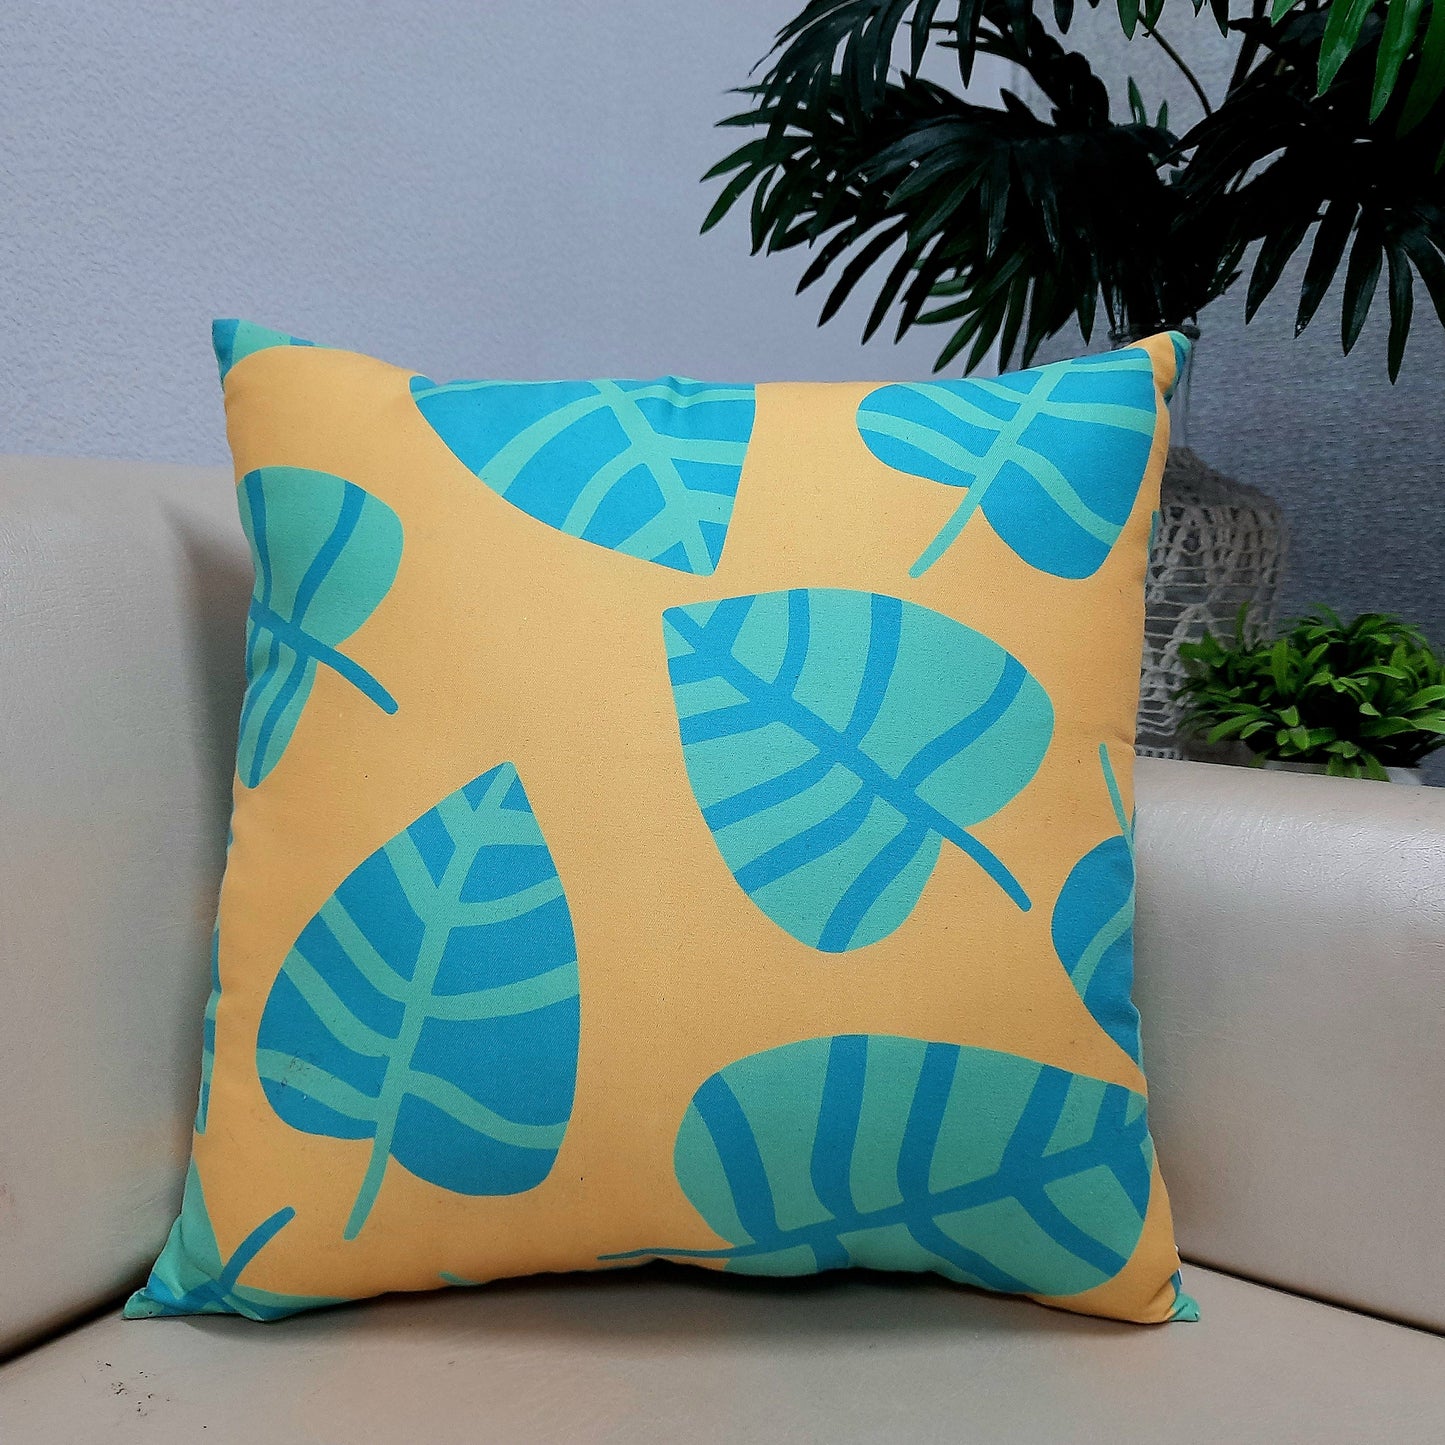 Riviera Collection-Cushion Covers In Glace Cotton For Regular Use –Yellow With leaves – Best Price 40cm x 40cm (~16″ x 16″) – Set of 5